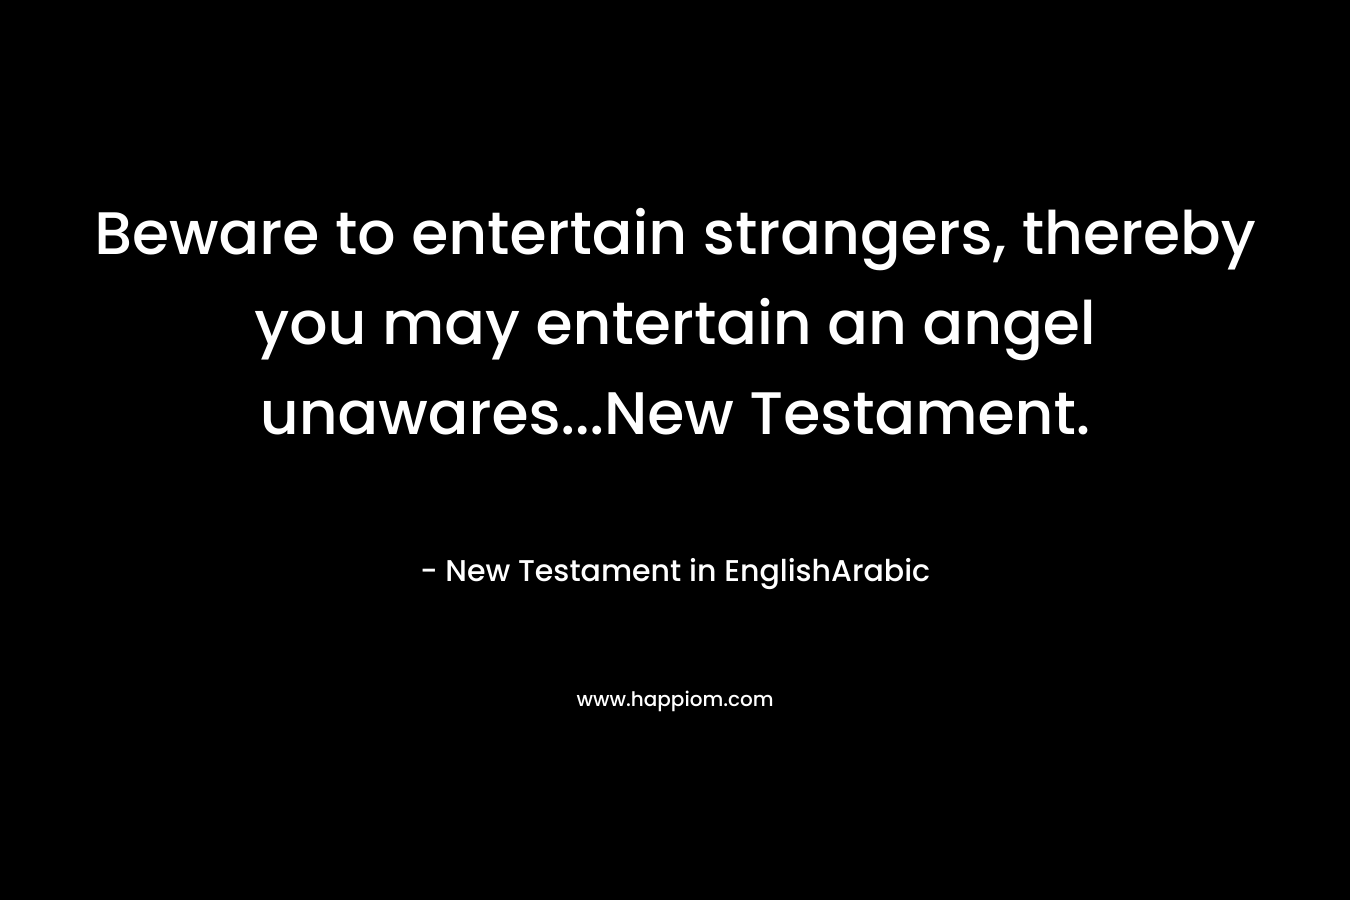 Beware to entertain strangers, thereby you may entertain an angel unawares…New Testament. – New Testament in EnglishArabic